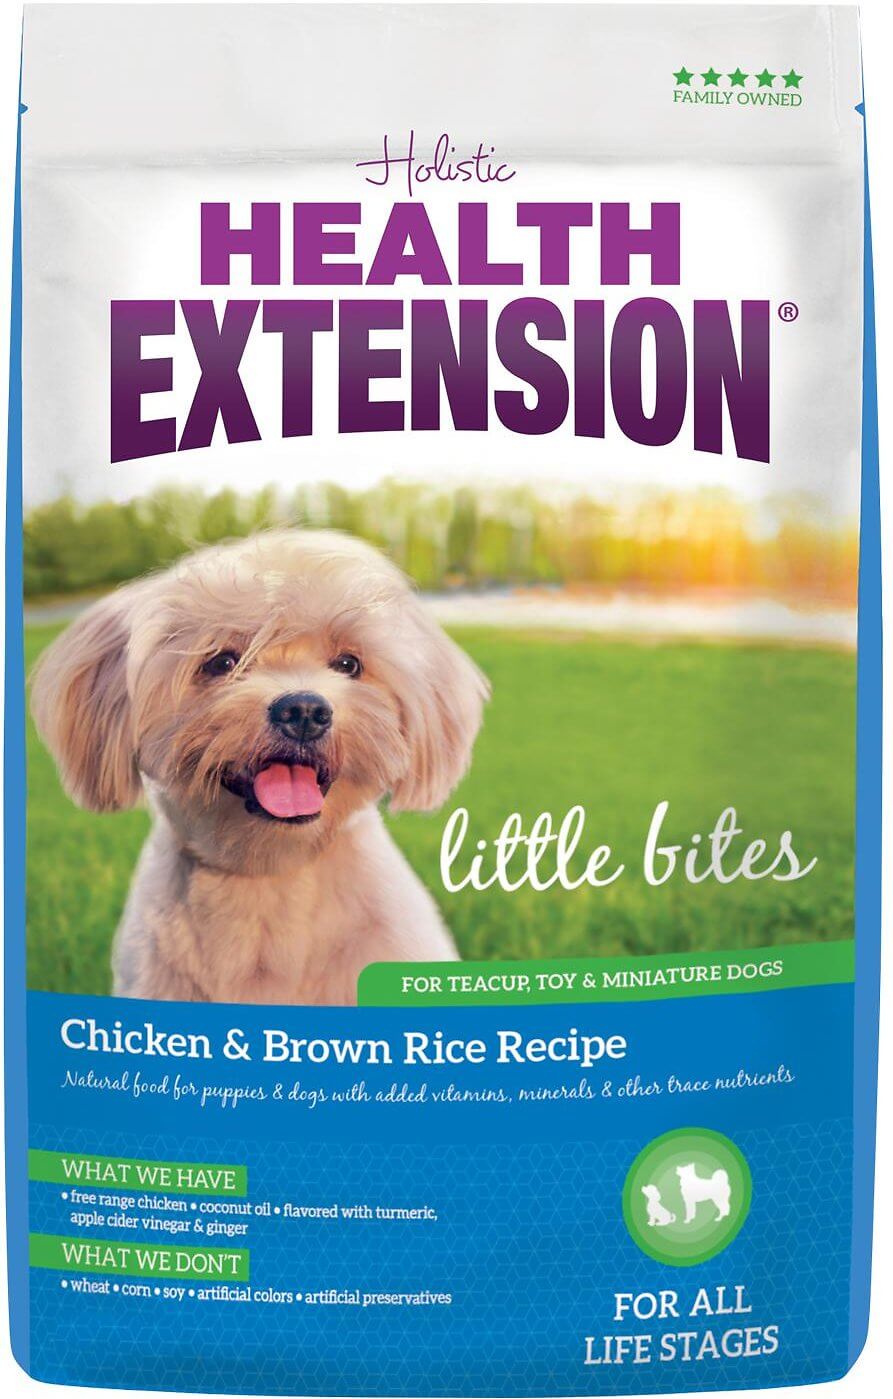 Health Extension Grain Free Dog Food Review Rating Recalls